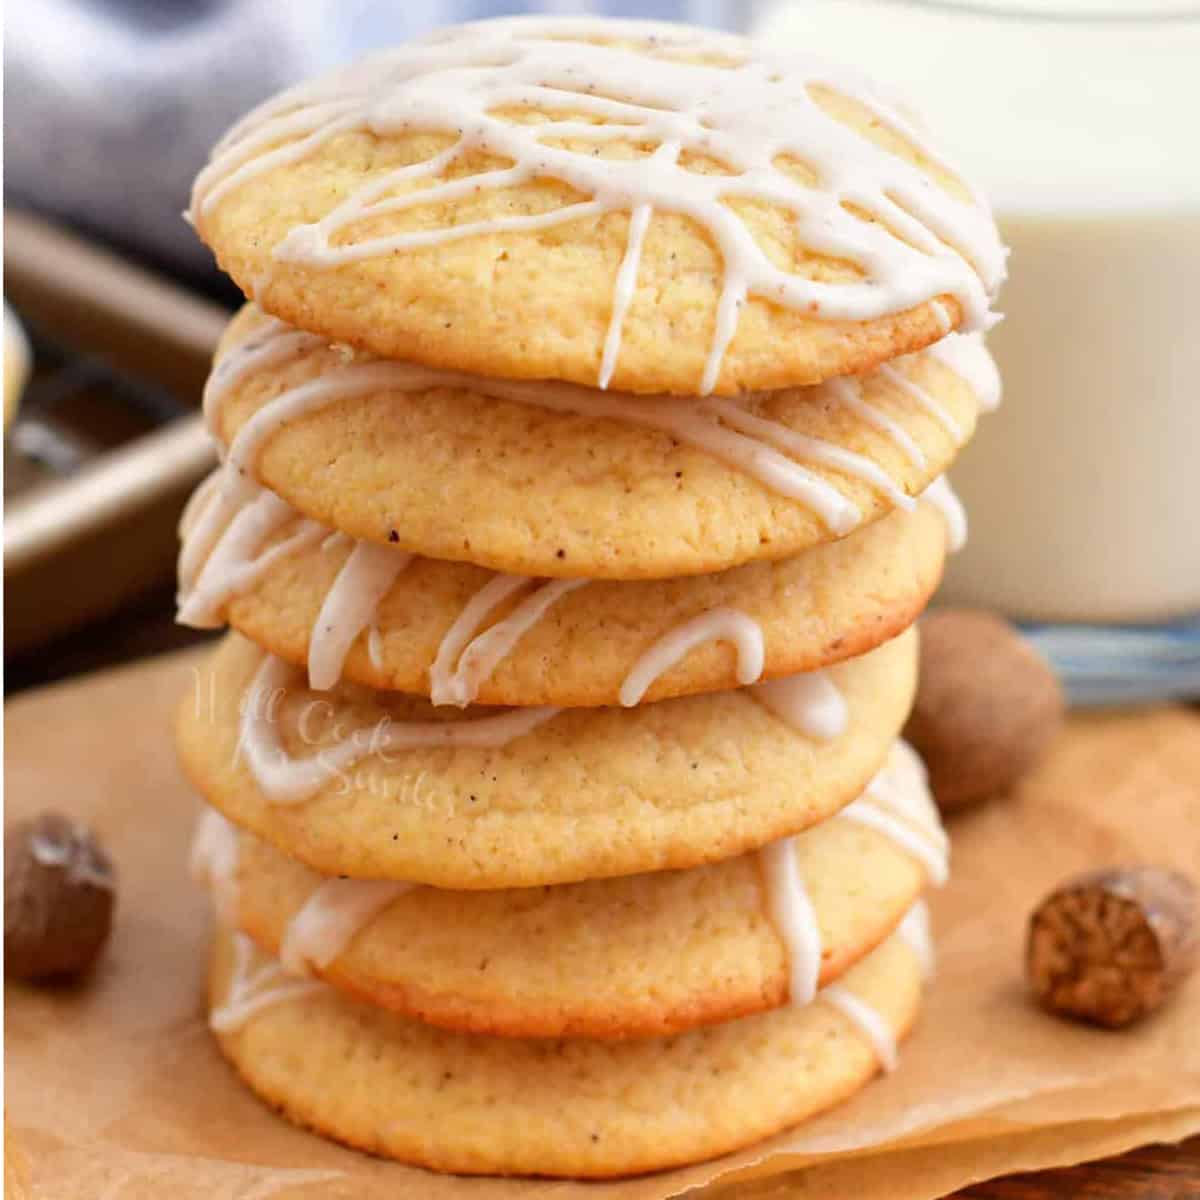 A stack of cookies drizzled with a white glaze.